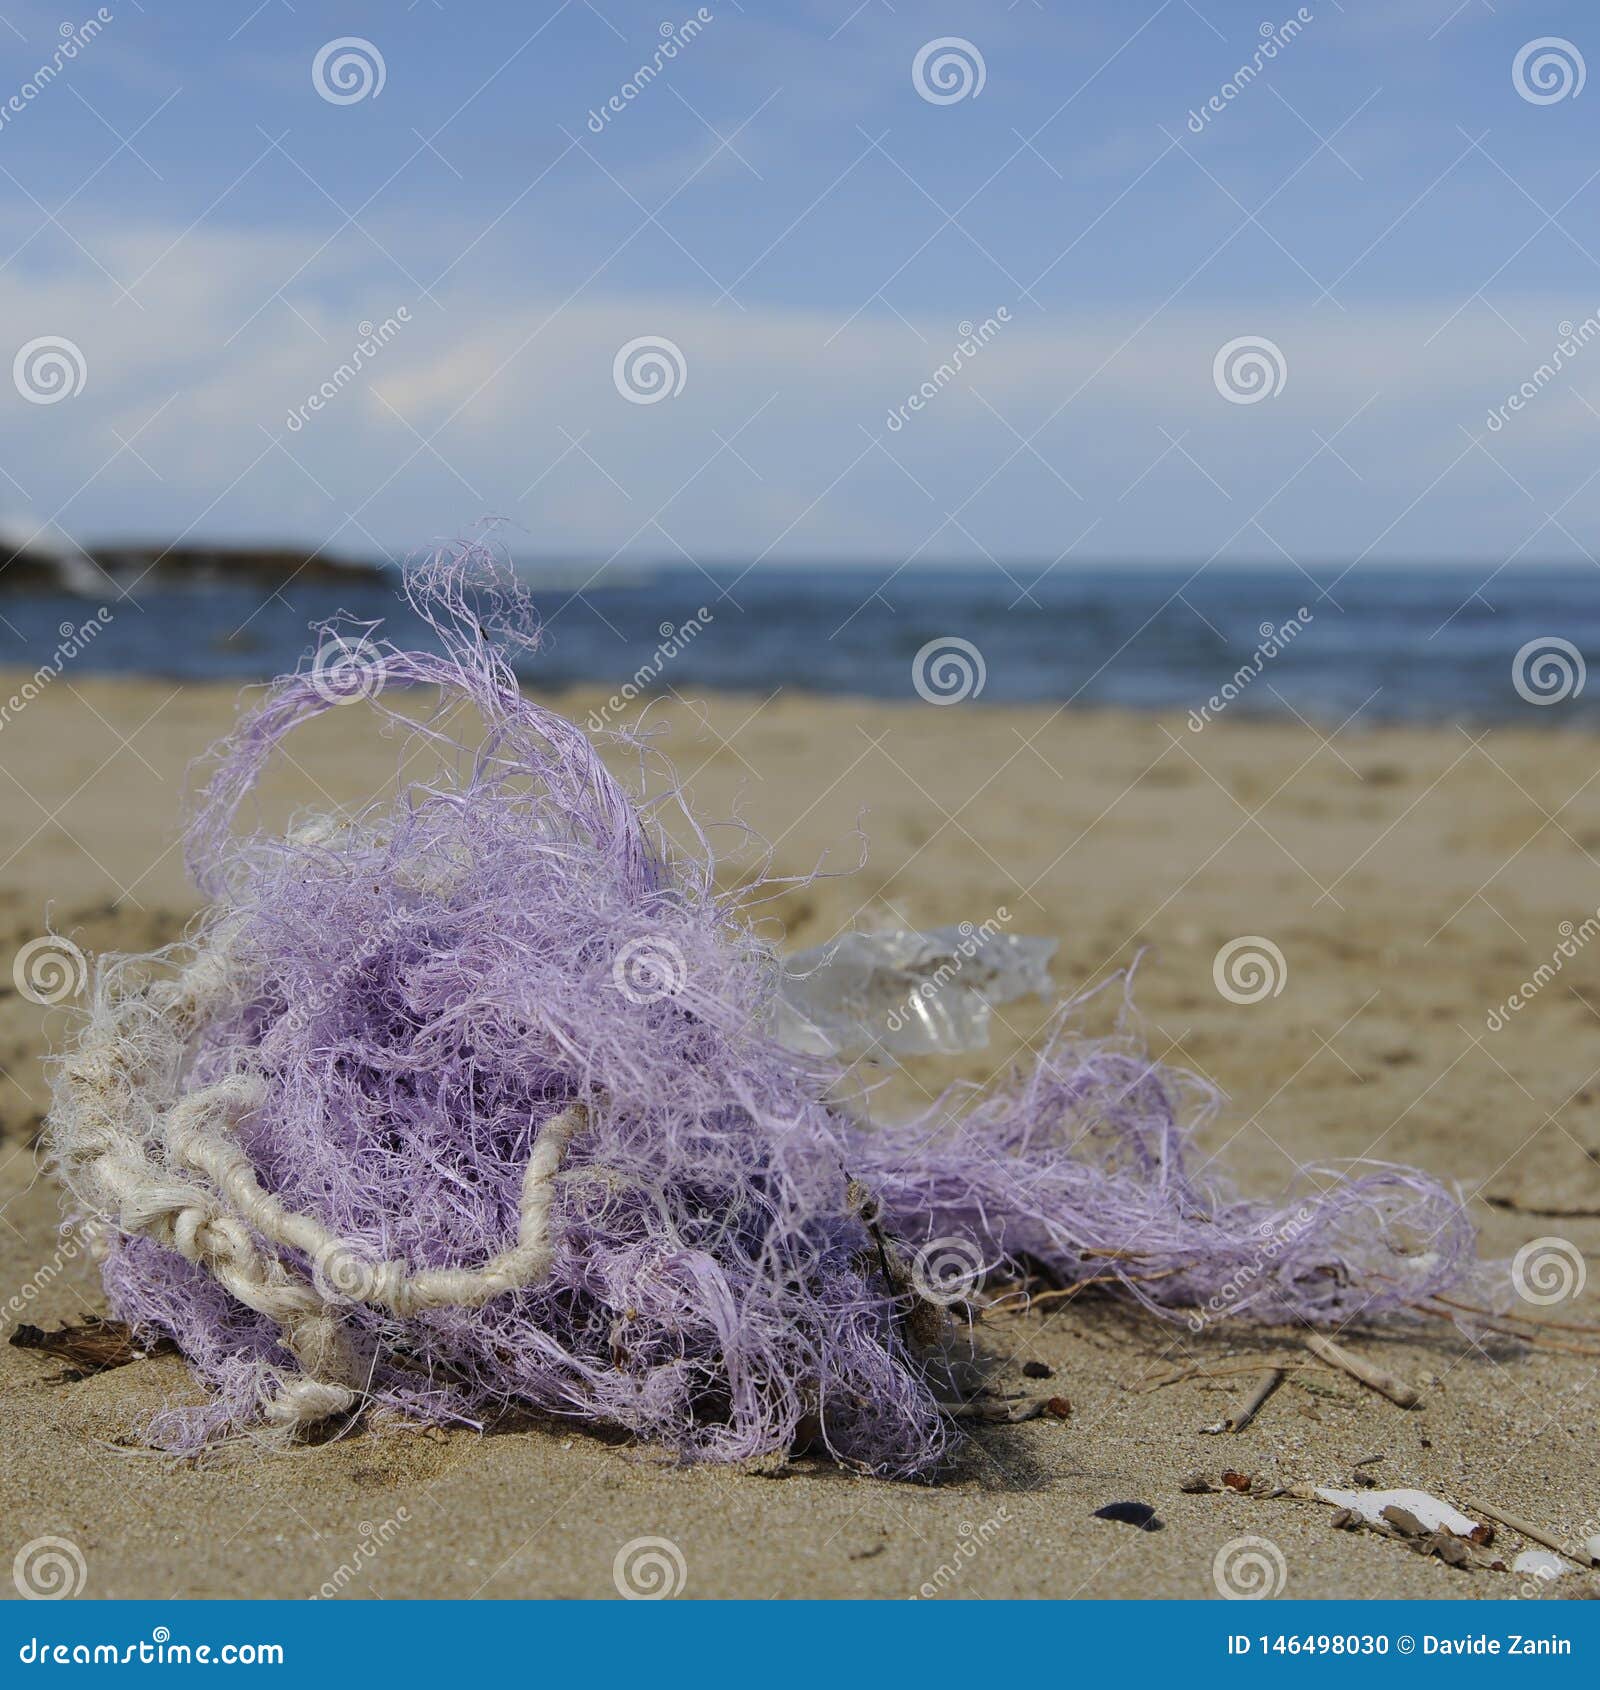 Fishing Nylon Net on the Sand. Garbage on the Beach. Dirty Sea